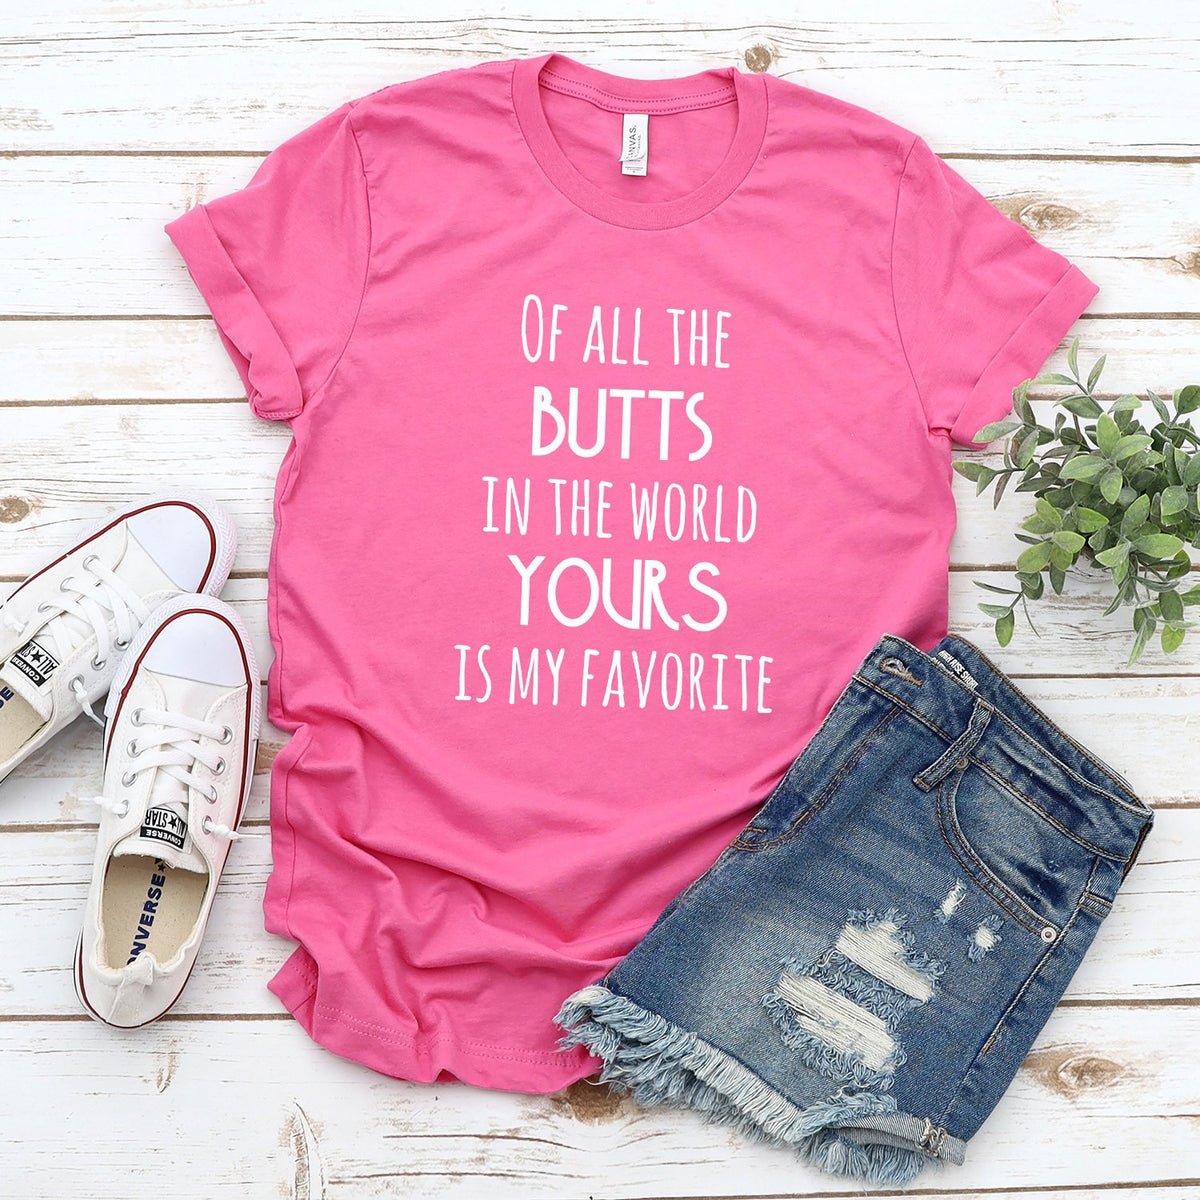 Off All the Butts in the World Yours is My Favorite - Short Sleeve Tee Shirt